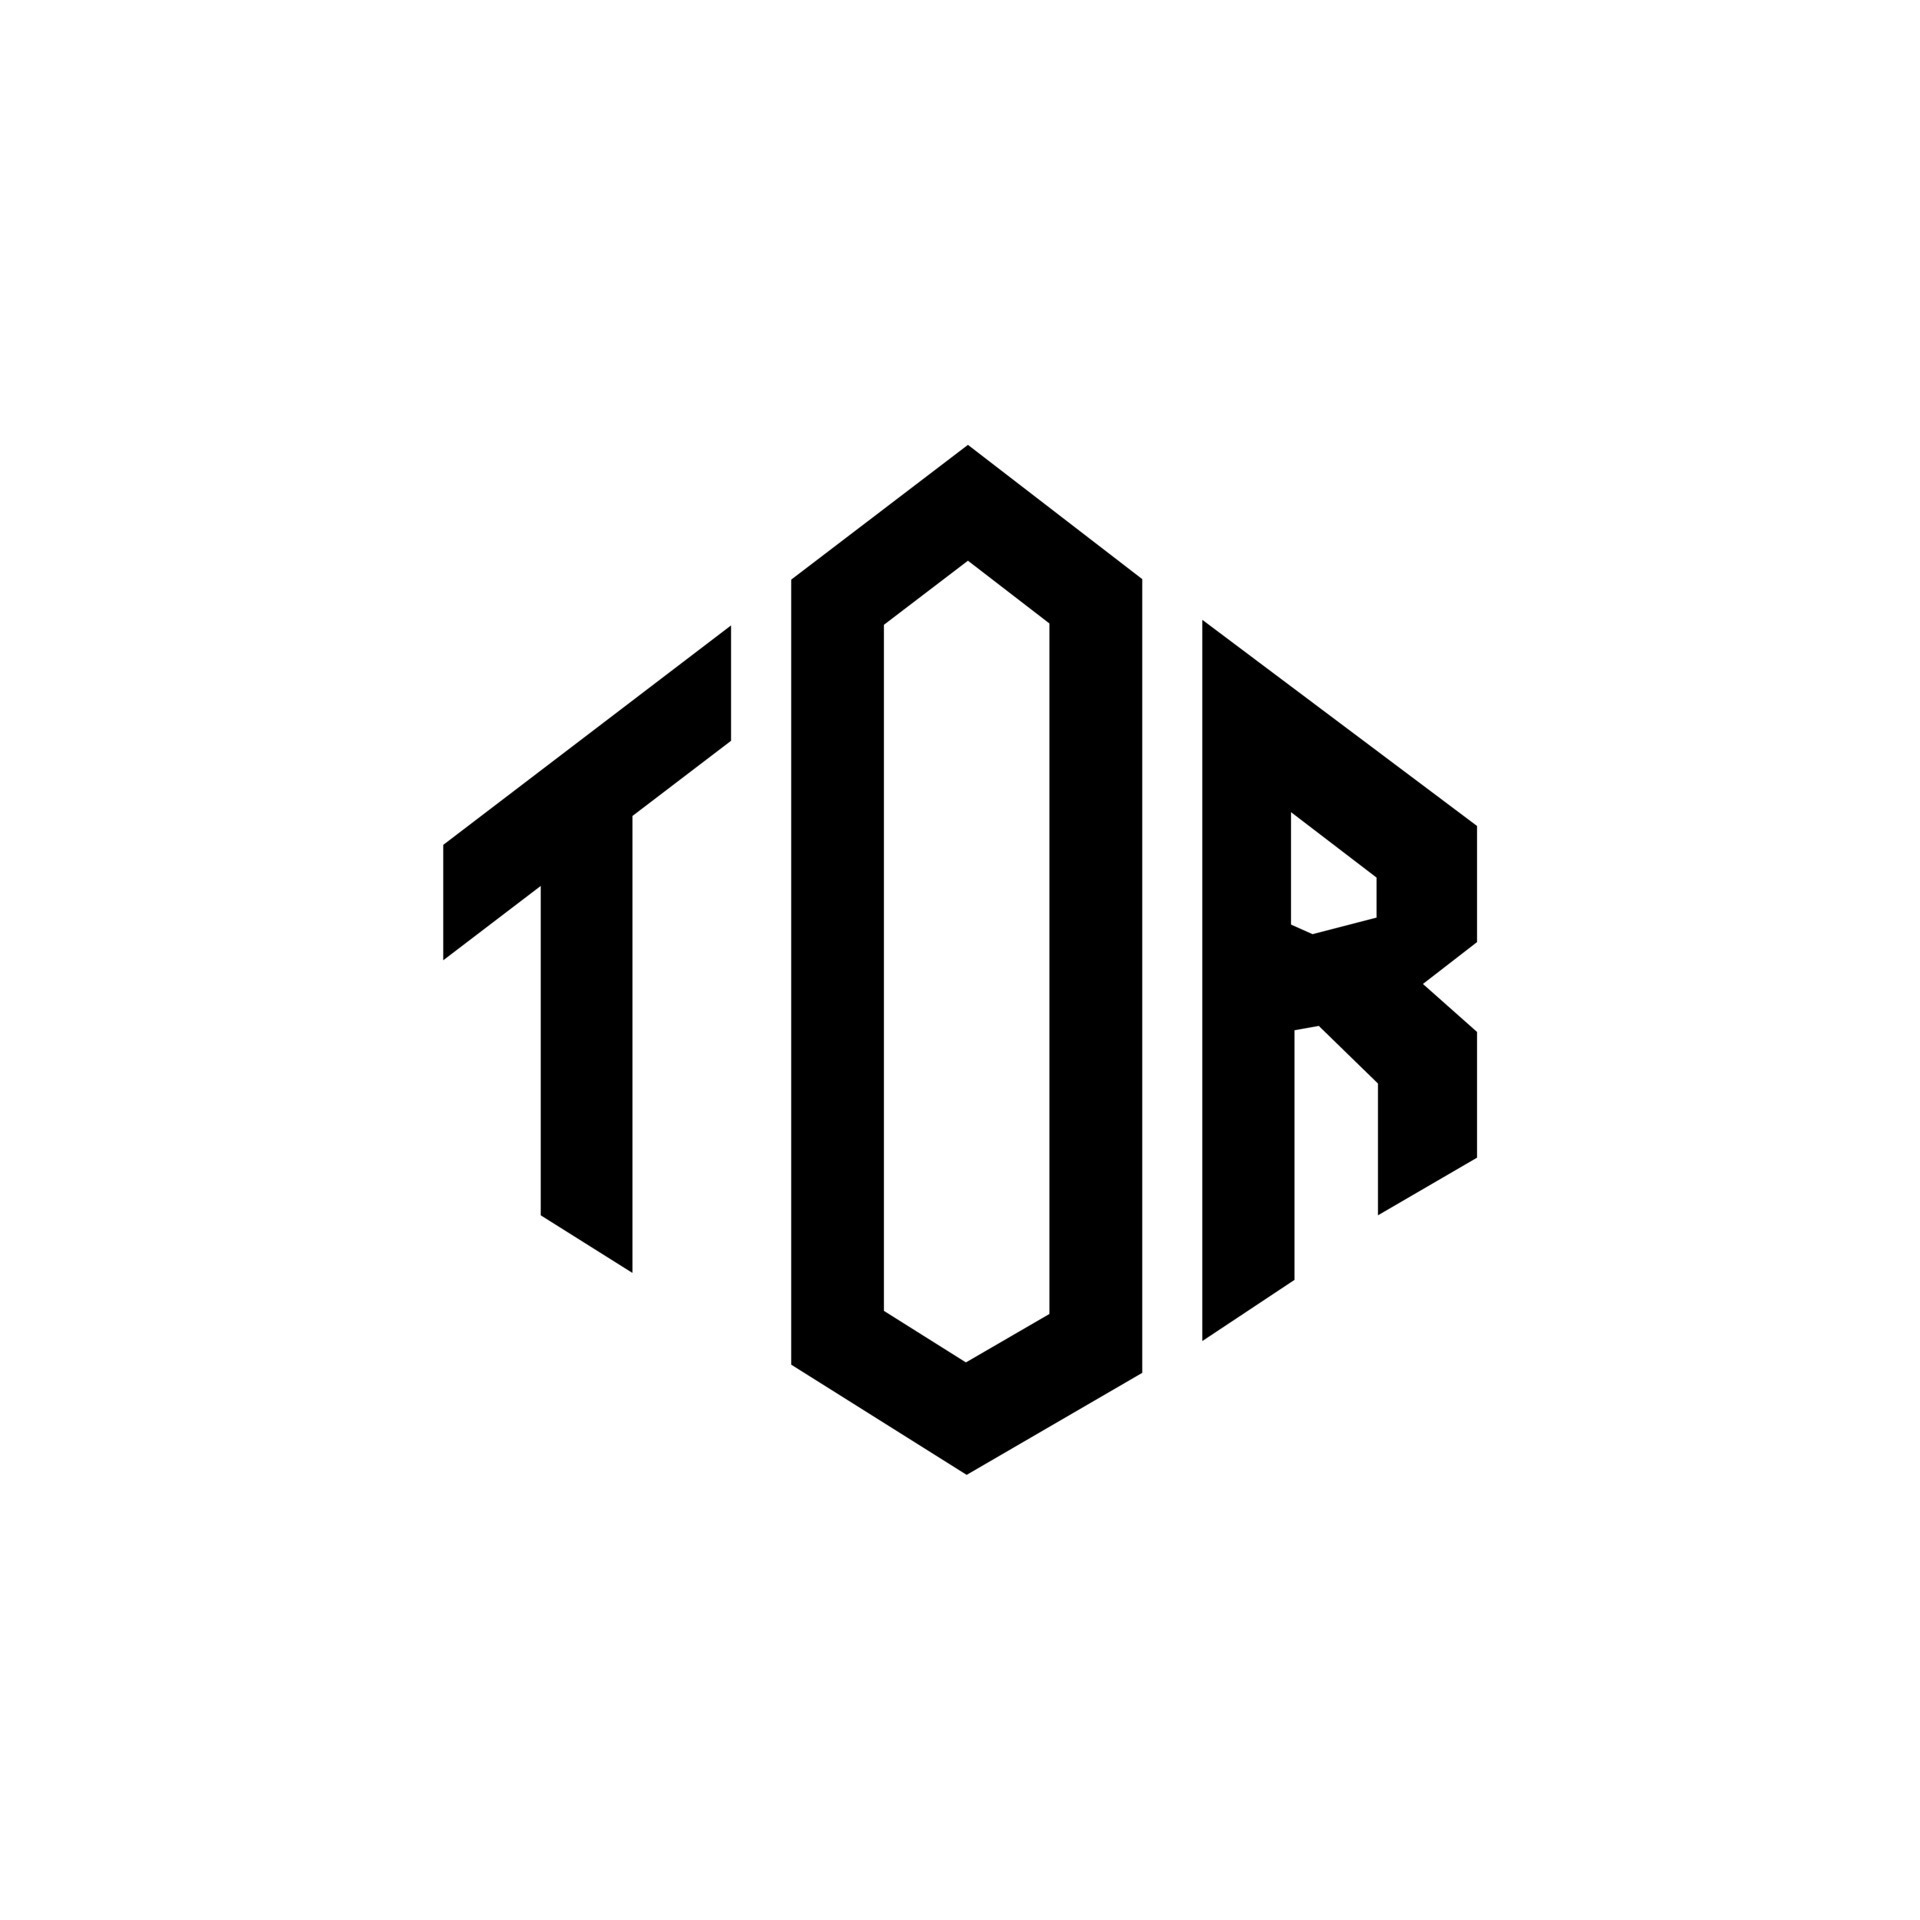 Details more than 130 tor logo latest